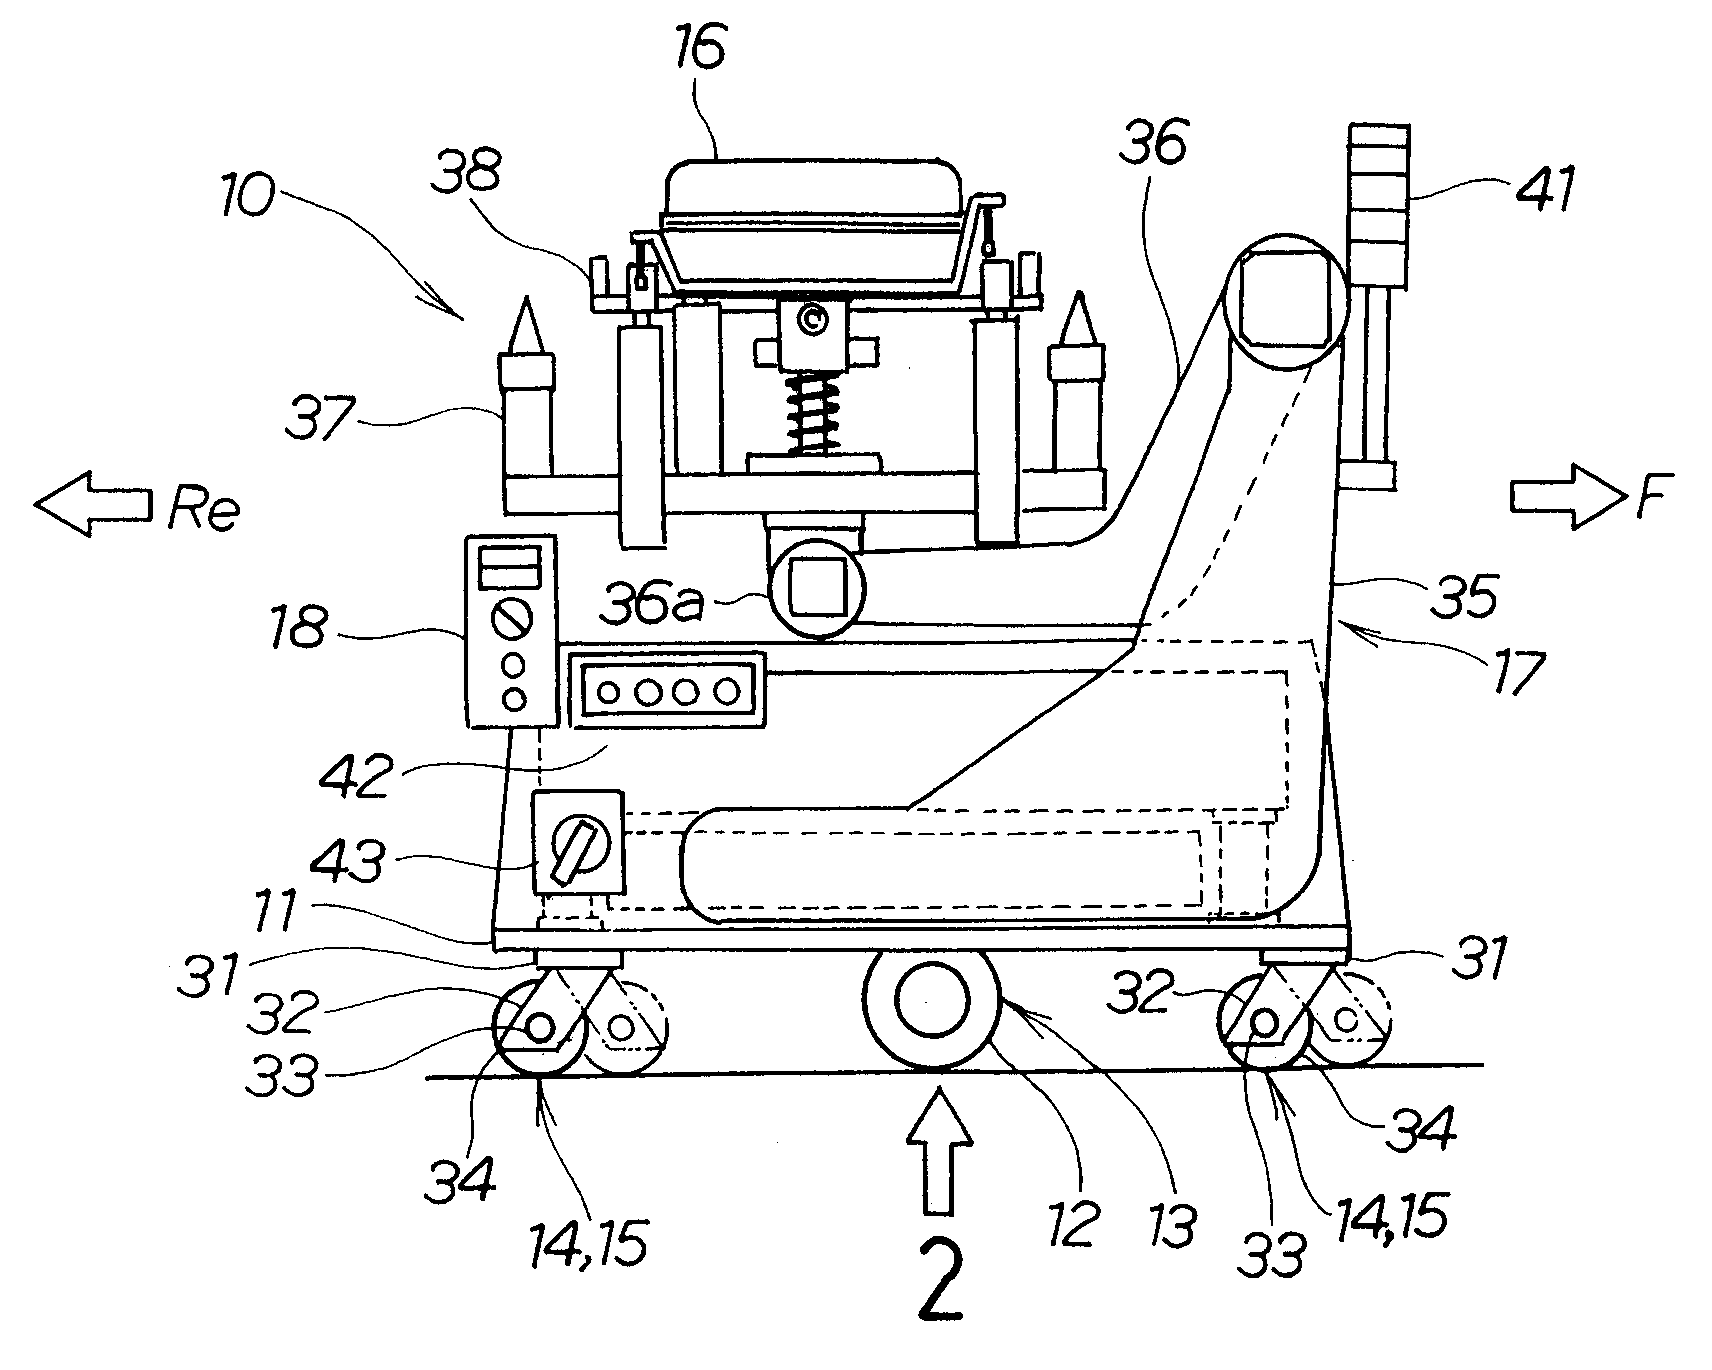 Travel Control Method For Self-Propelled Carriage